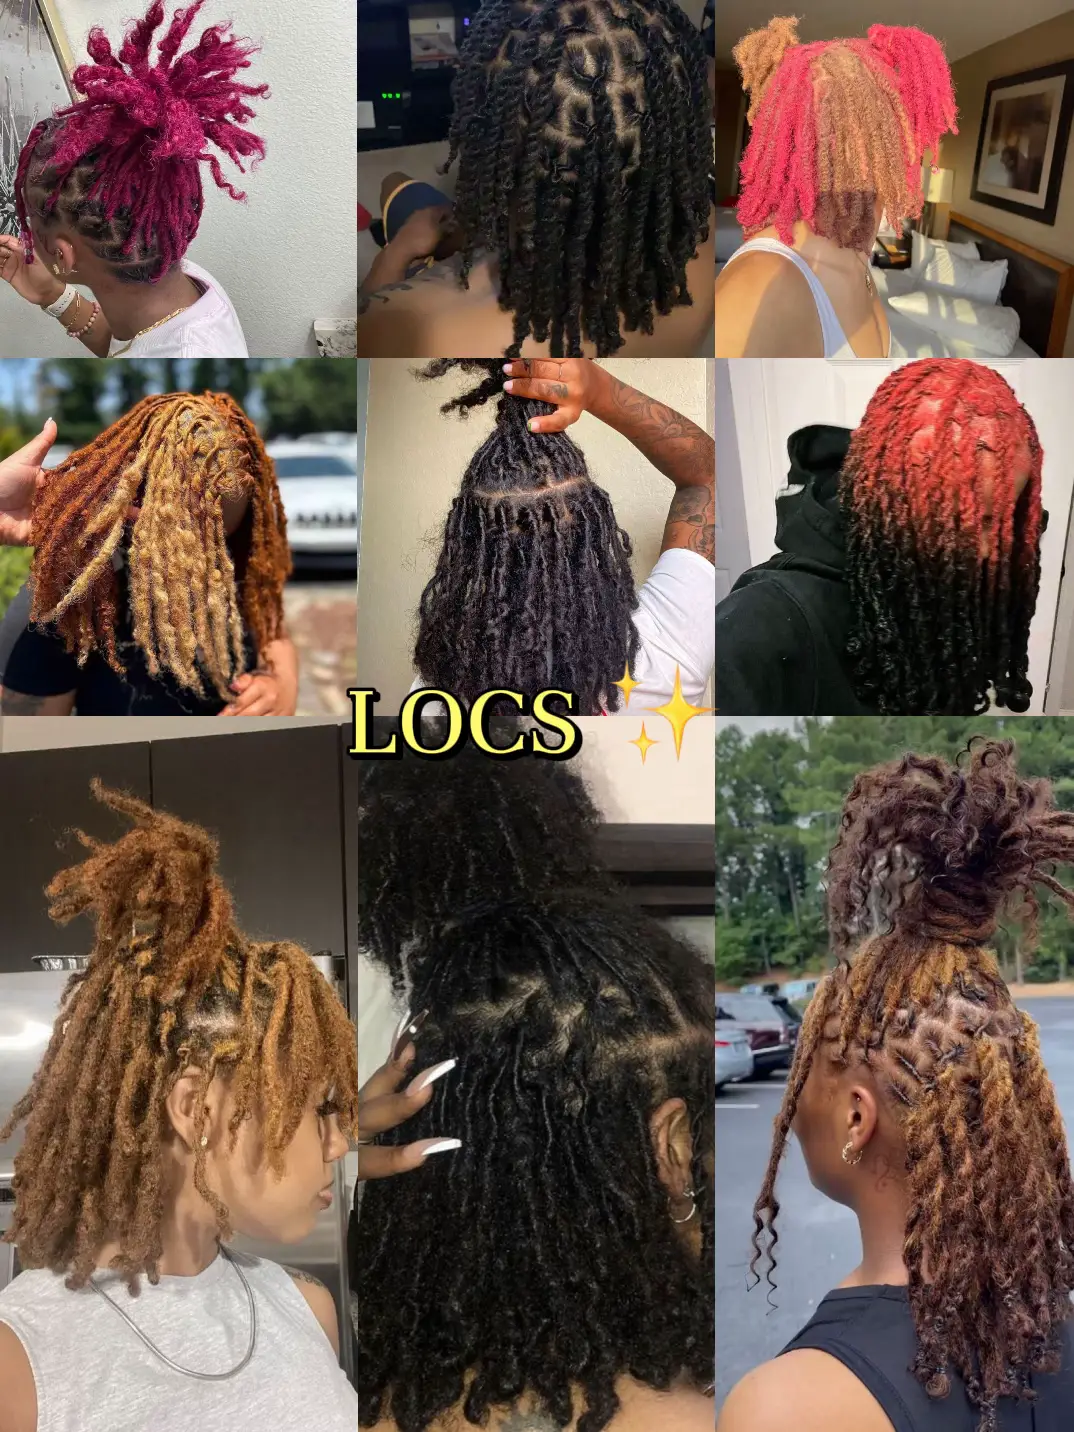 Mini twists give me so much life!!! If you are contemplating locs or just  want a style that's versatile but still natural, mini twists ar